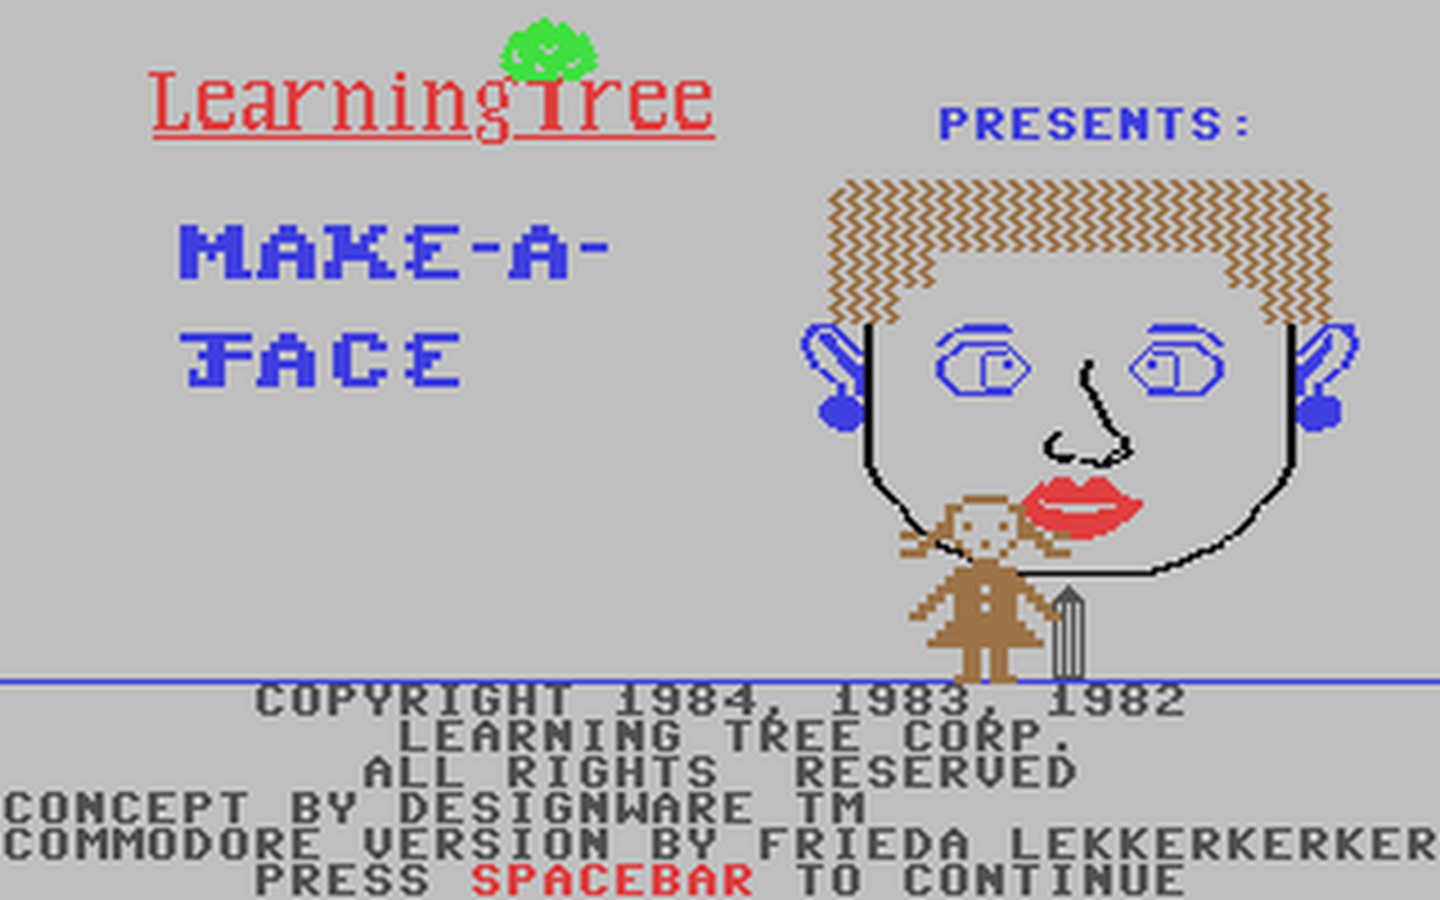 C64 GameBase Make-a-Face Learning_Tree_Corp. 1984